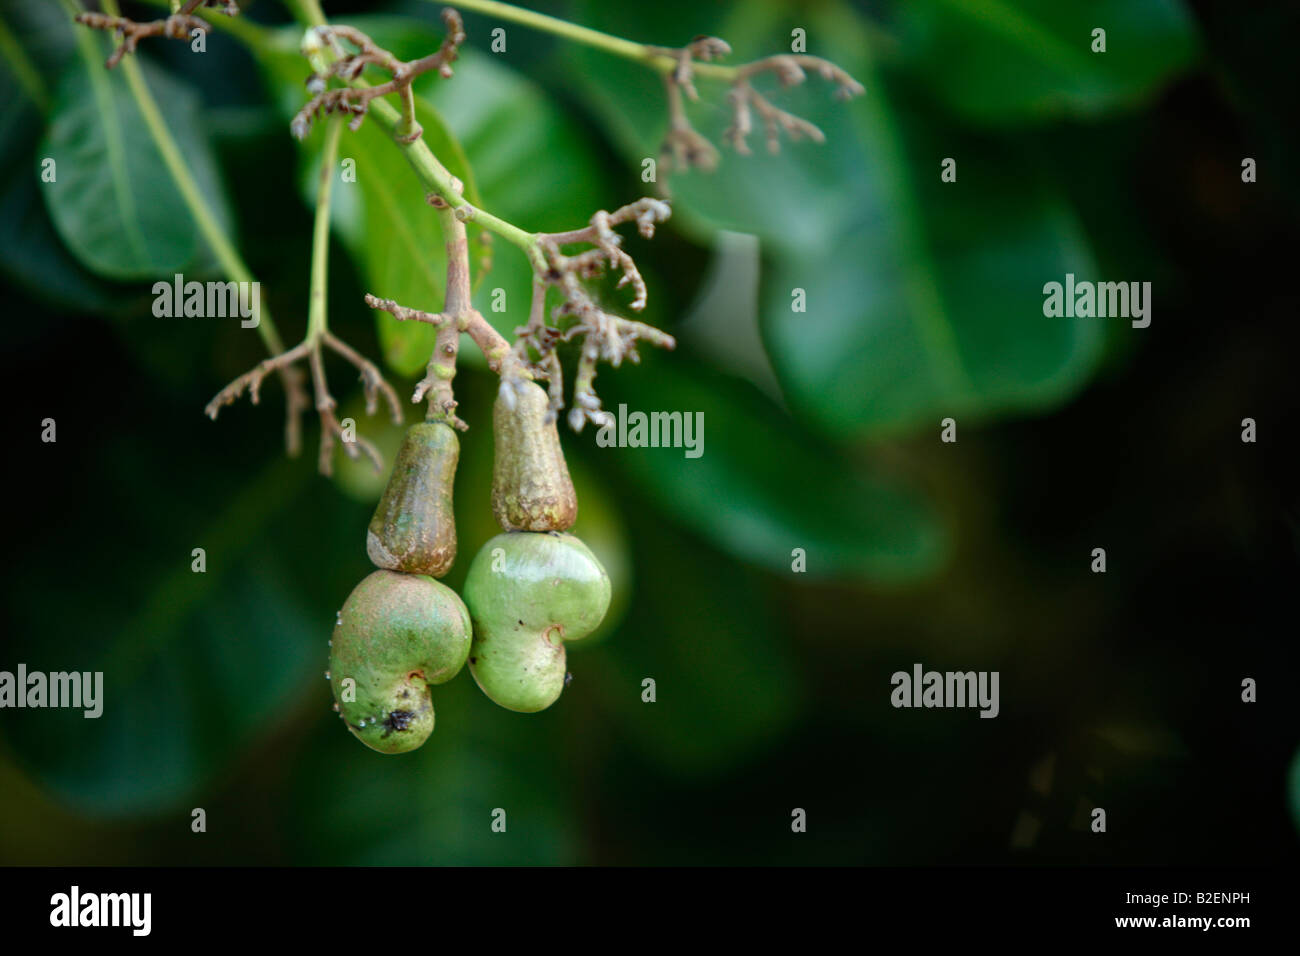 Close up of a Cashew nut tree showing seeds and flowers Stock Photo